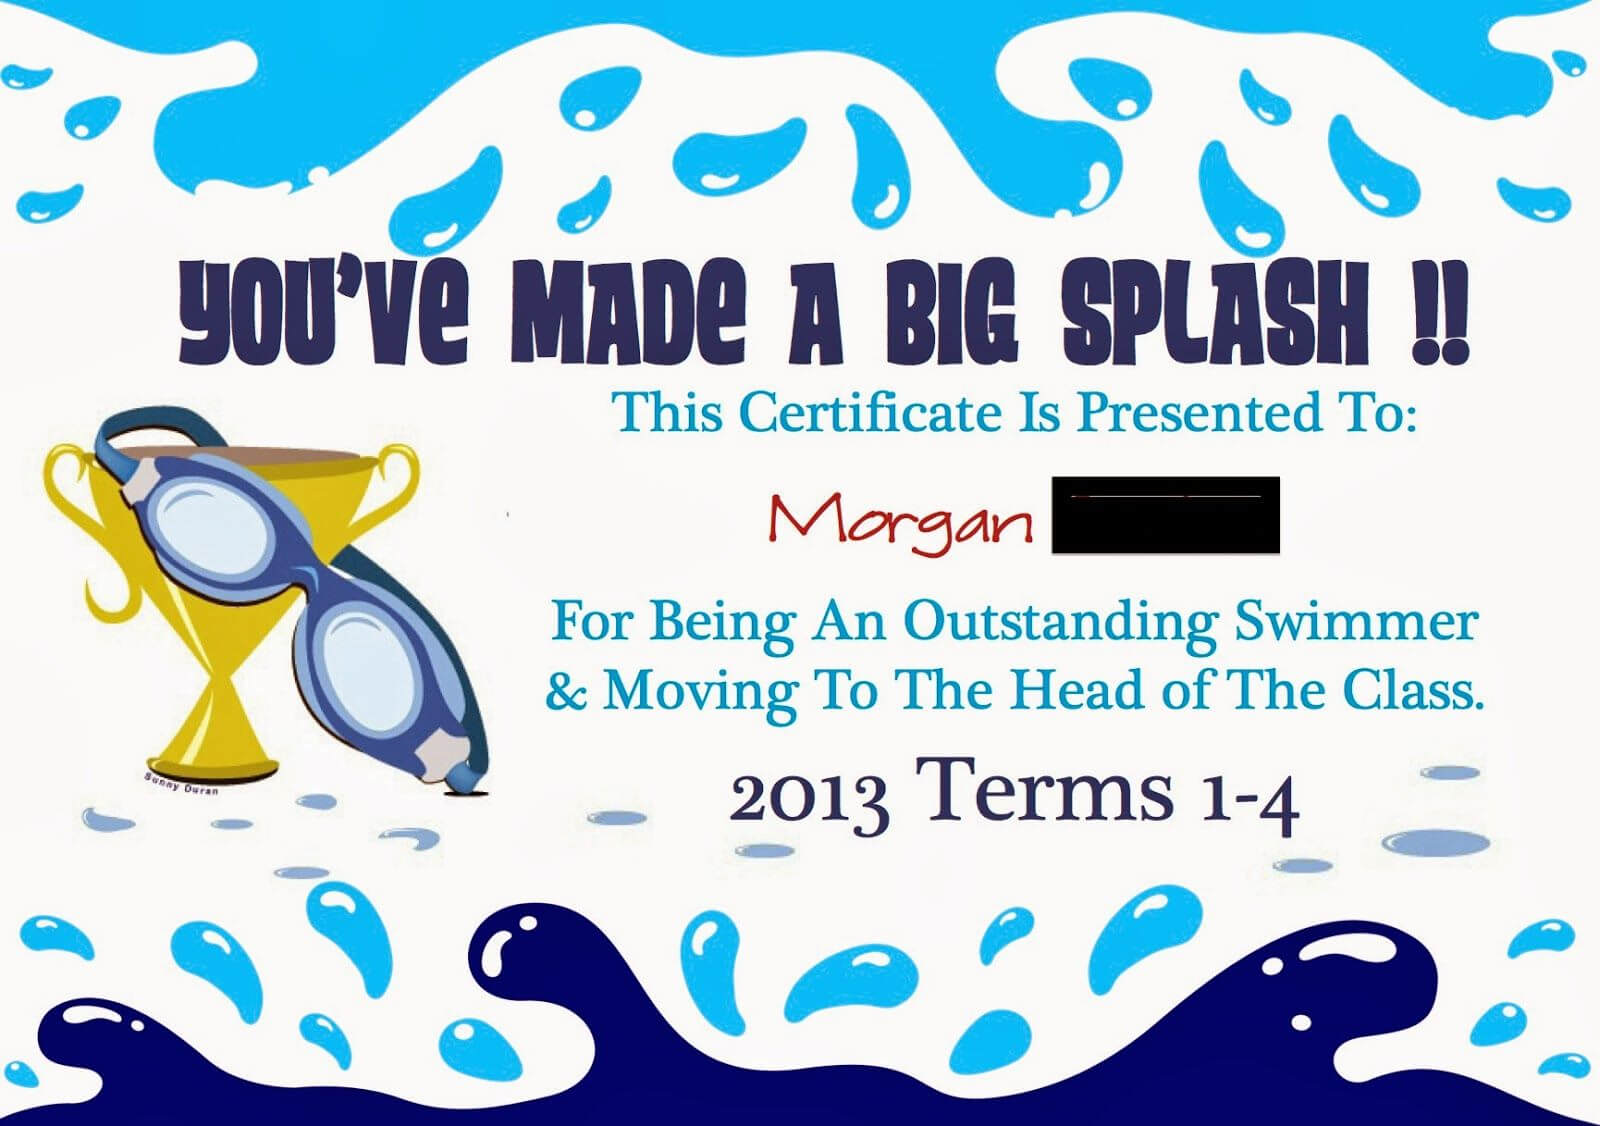 Pinmarwa Mattar On Swimming | Swimming Lessons For Kids Within Swimming Award Certificate Template